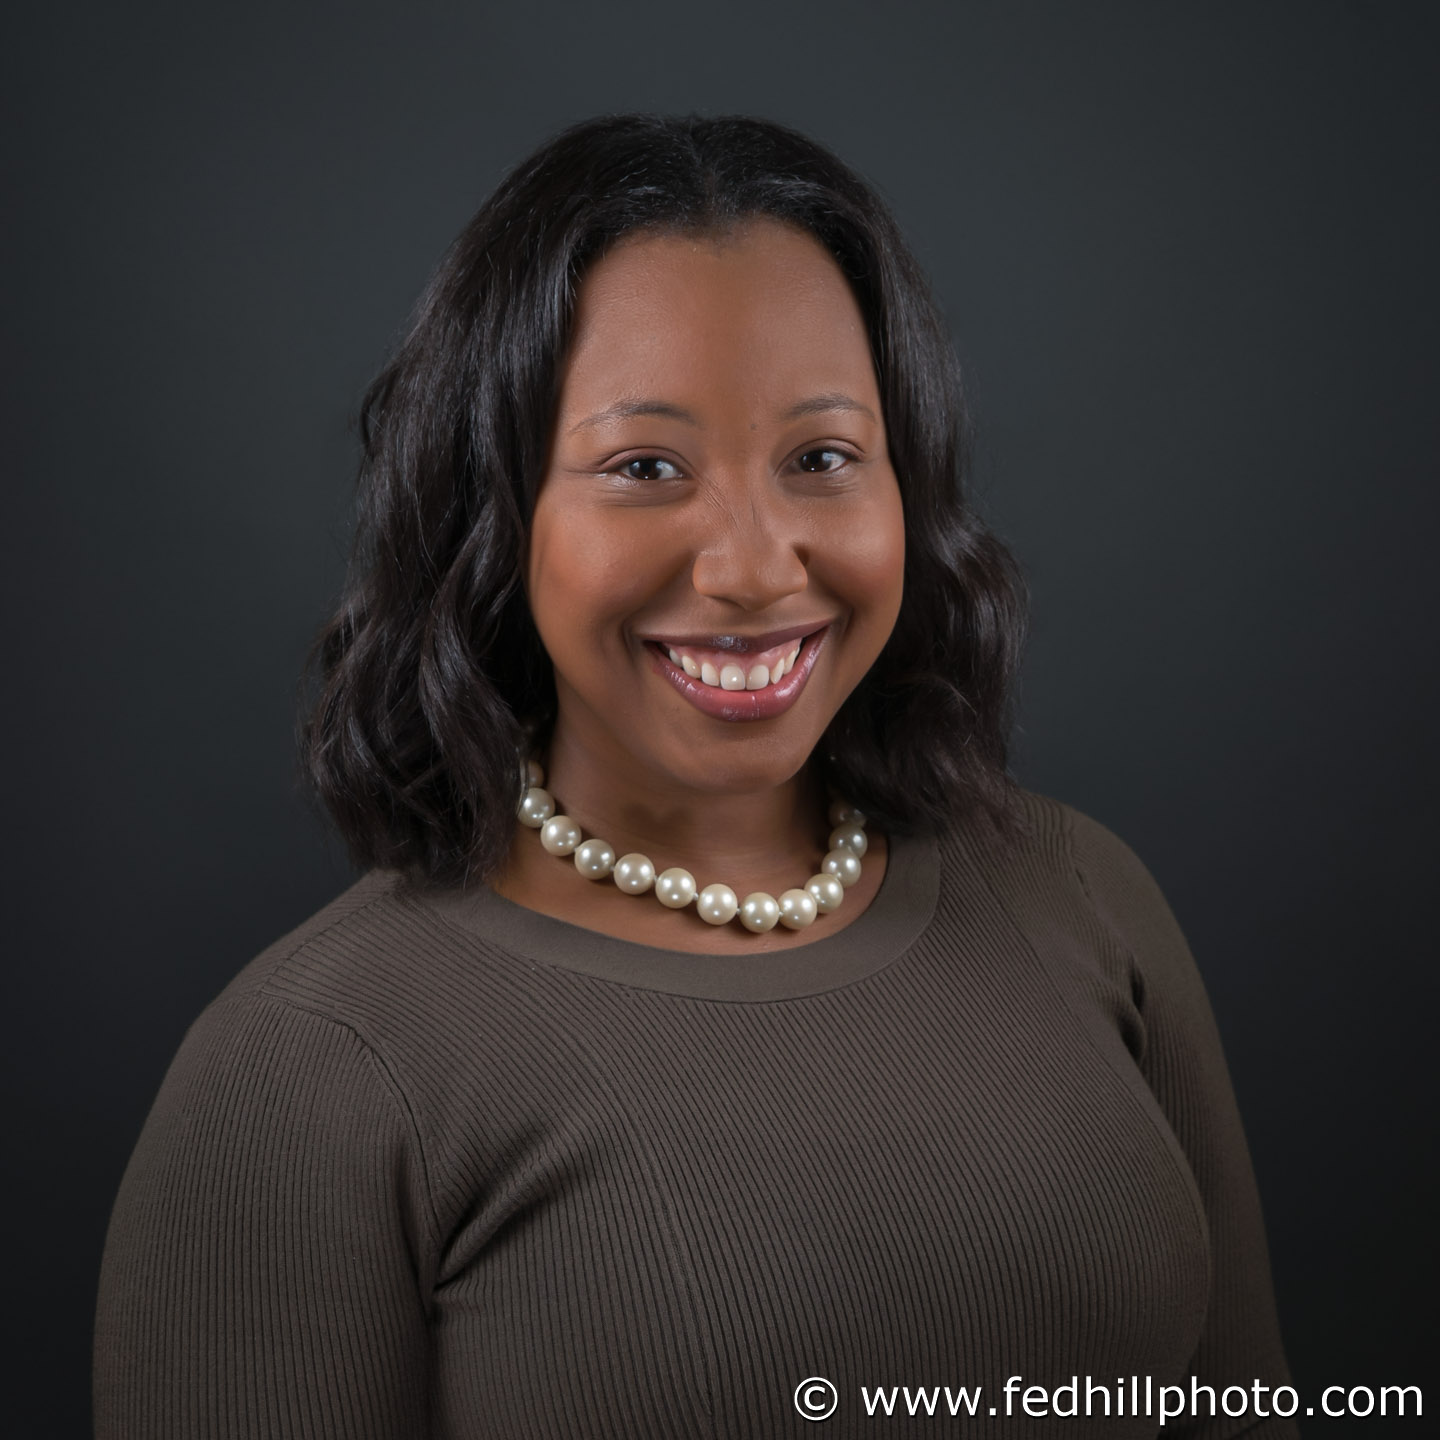 Professional headshot/business portrait by Federal Hill Photography, LLC